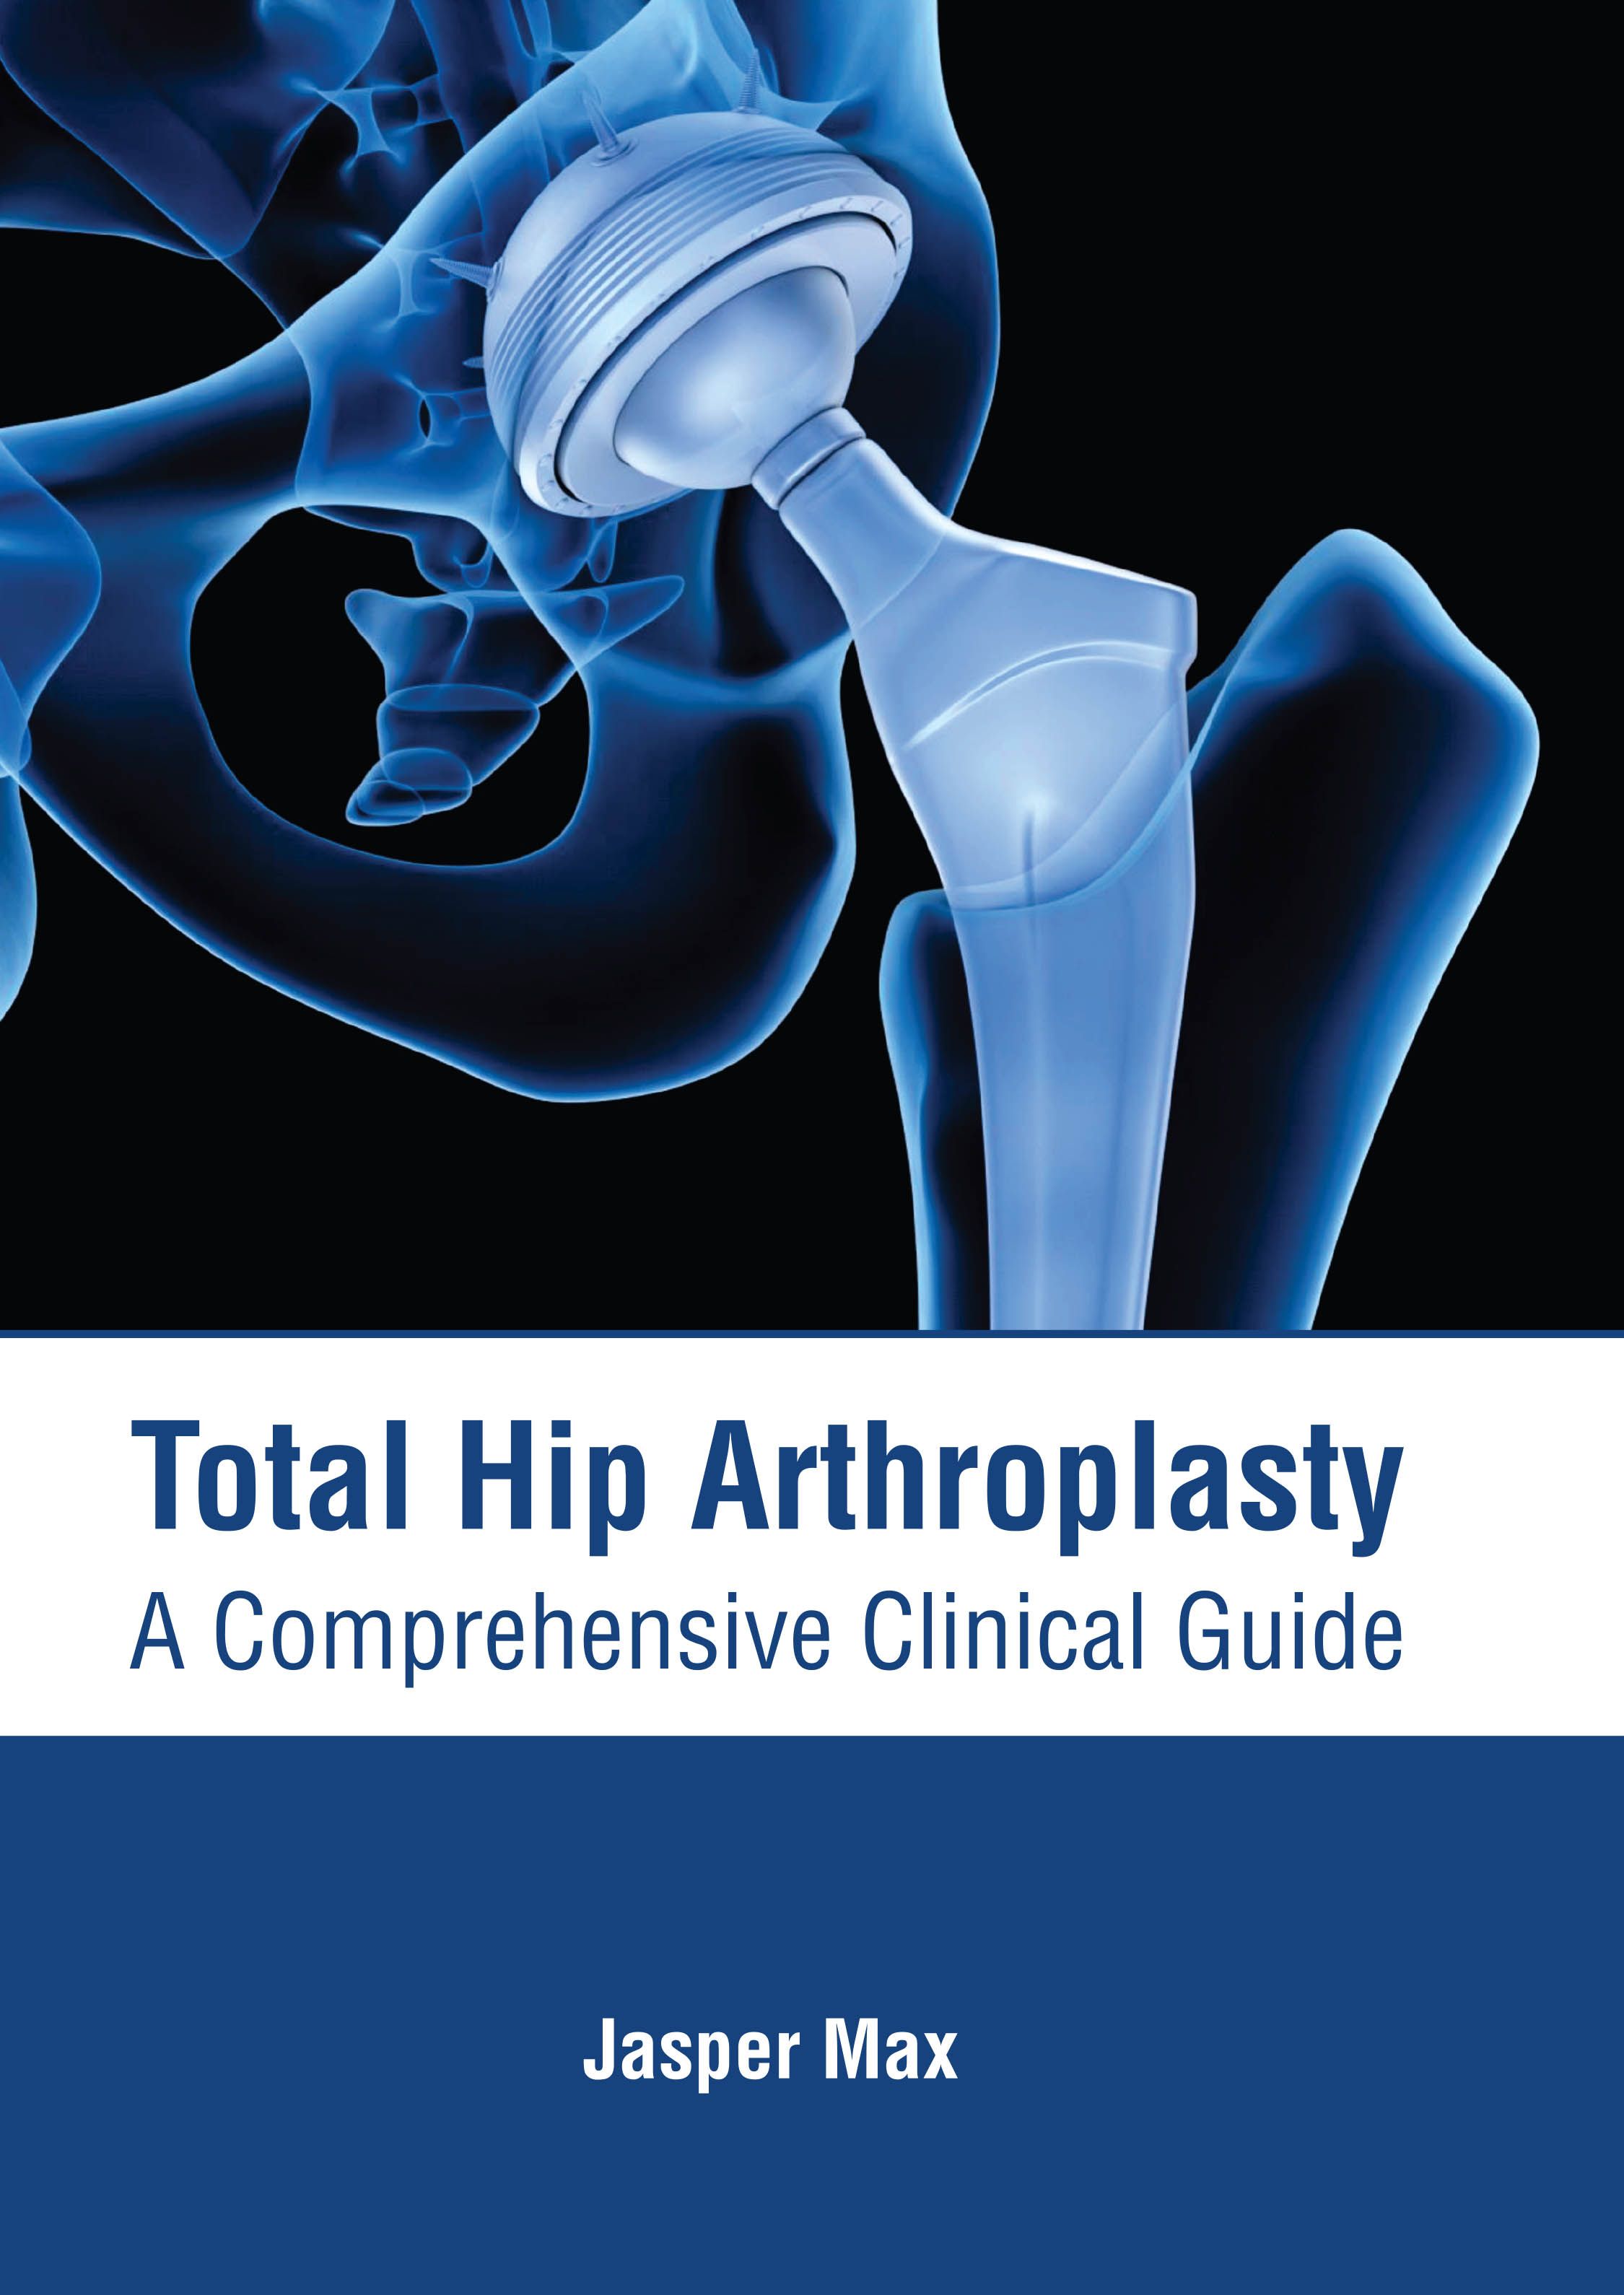 TOTAL HIP ARTHROPLASTY: A COMPREHENSIVE CLINICAL GUIDE- ISBN: 9781639274048